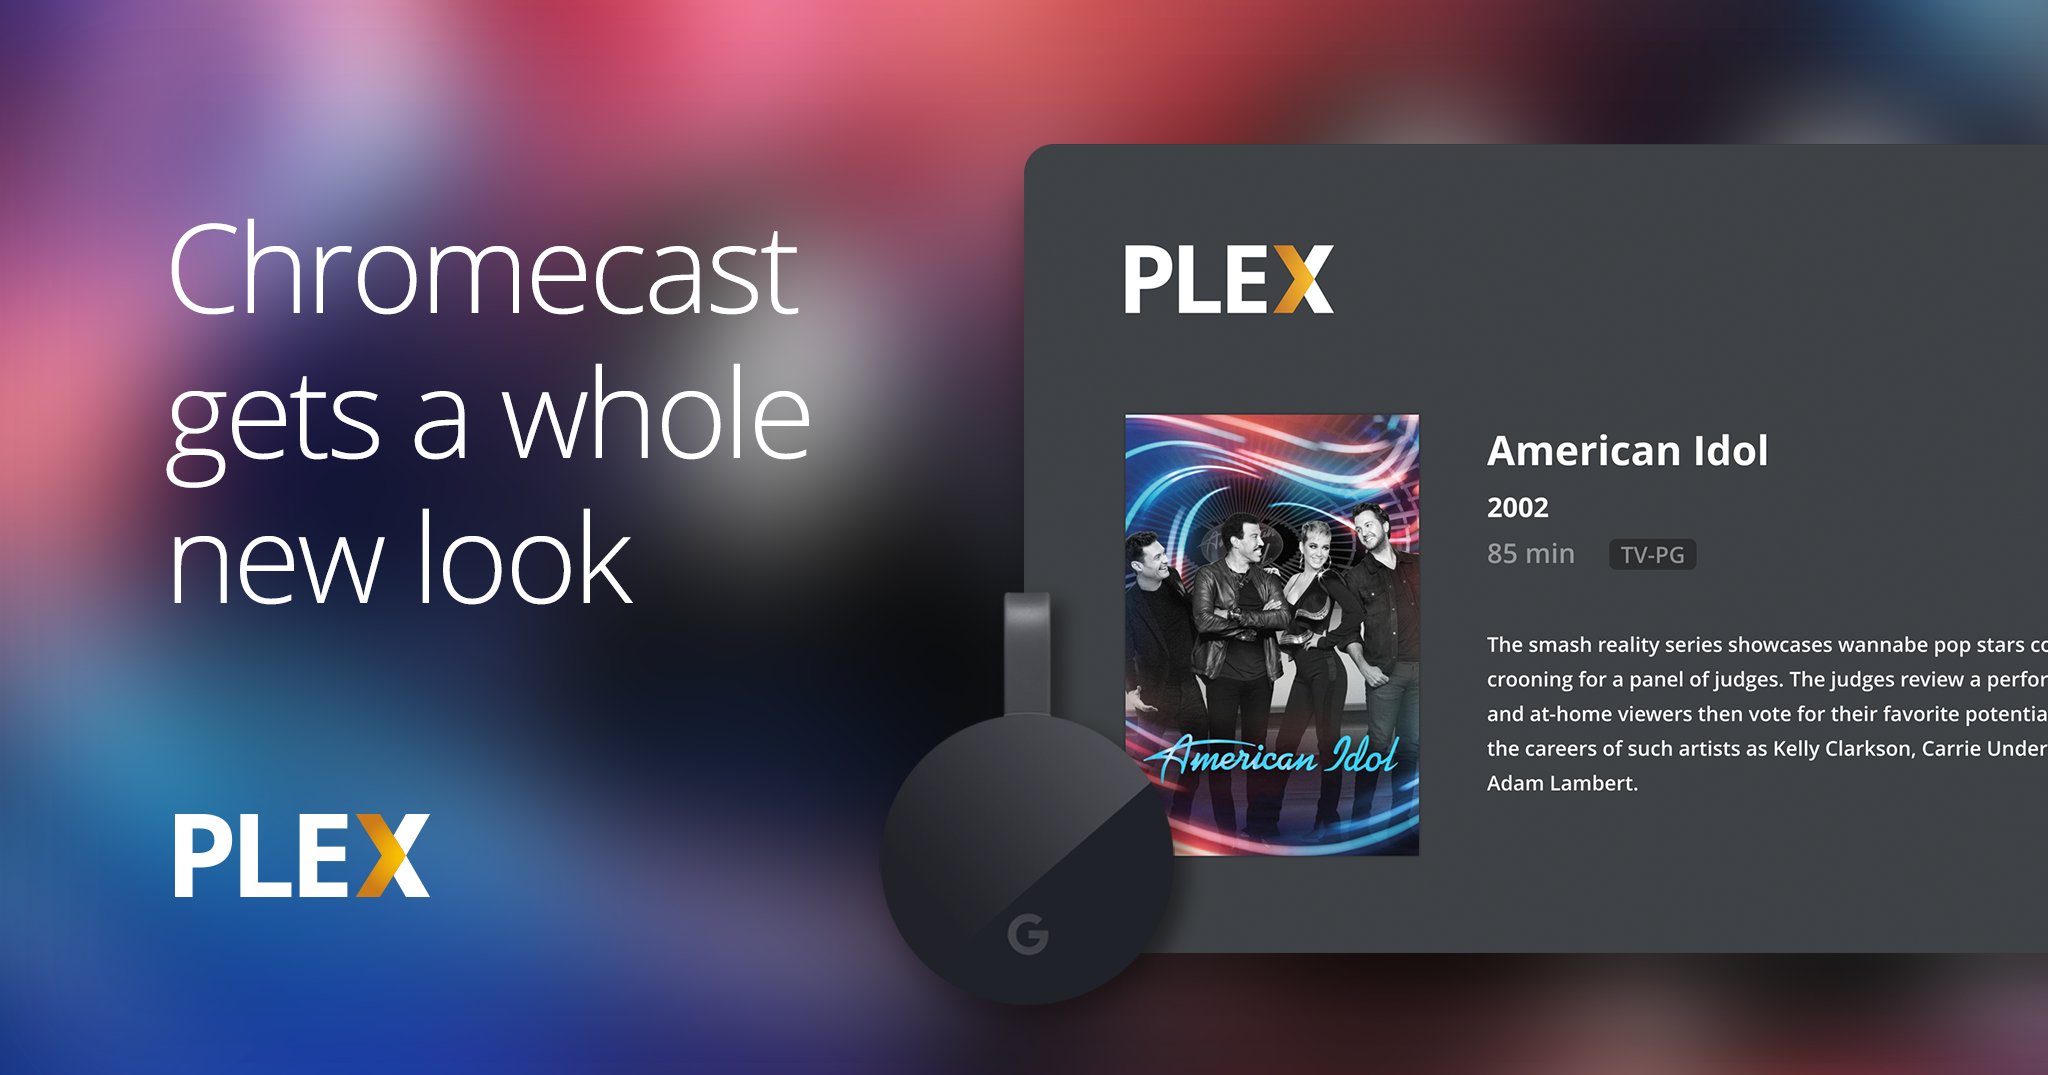 Udgangspunktet Lærd skarp Plex on Twitter: "Our Chromecast app has gotten a fancy new makeover! Along  with a new look, much more robust start and pre-play experiences,  under-the-hood improvements, and the same, seamless streaming power